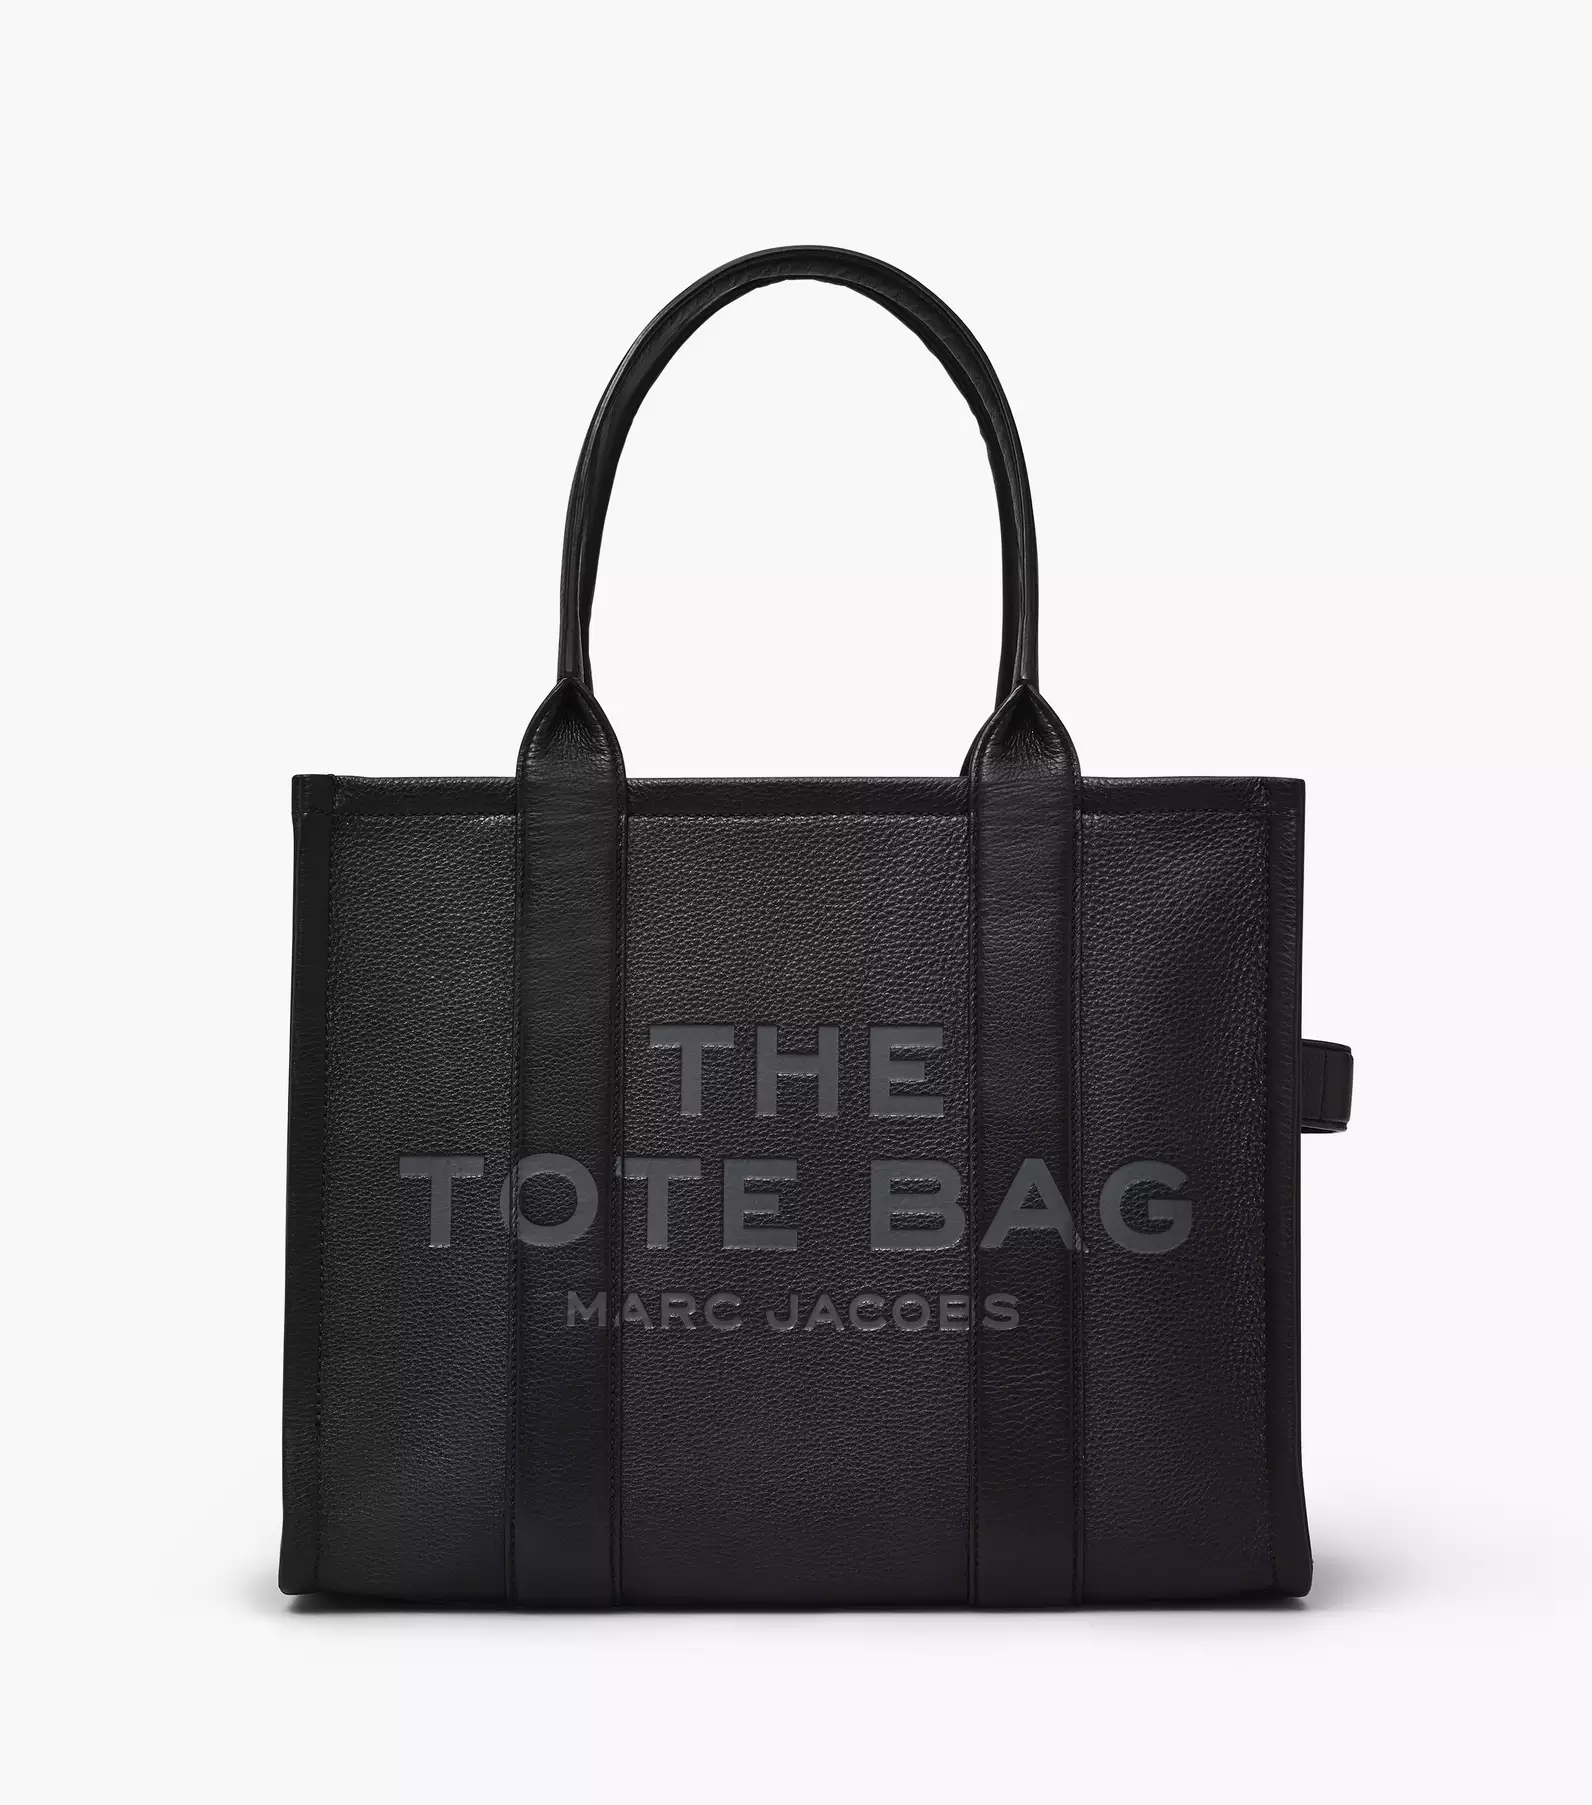  Marc Jacobs The Leather Tote Bag Argan Oil One Size : Clothing,  Shoes & Jewelry